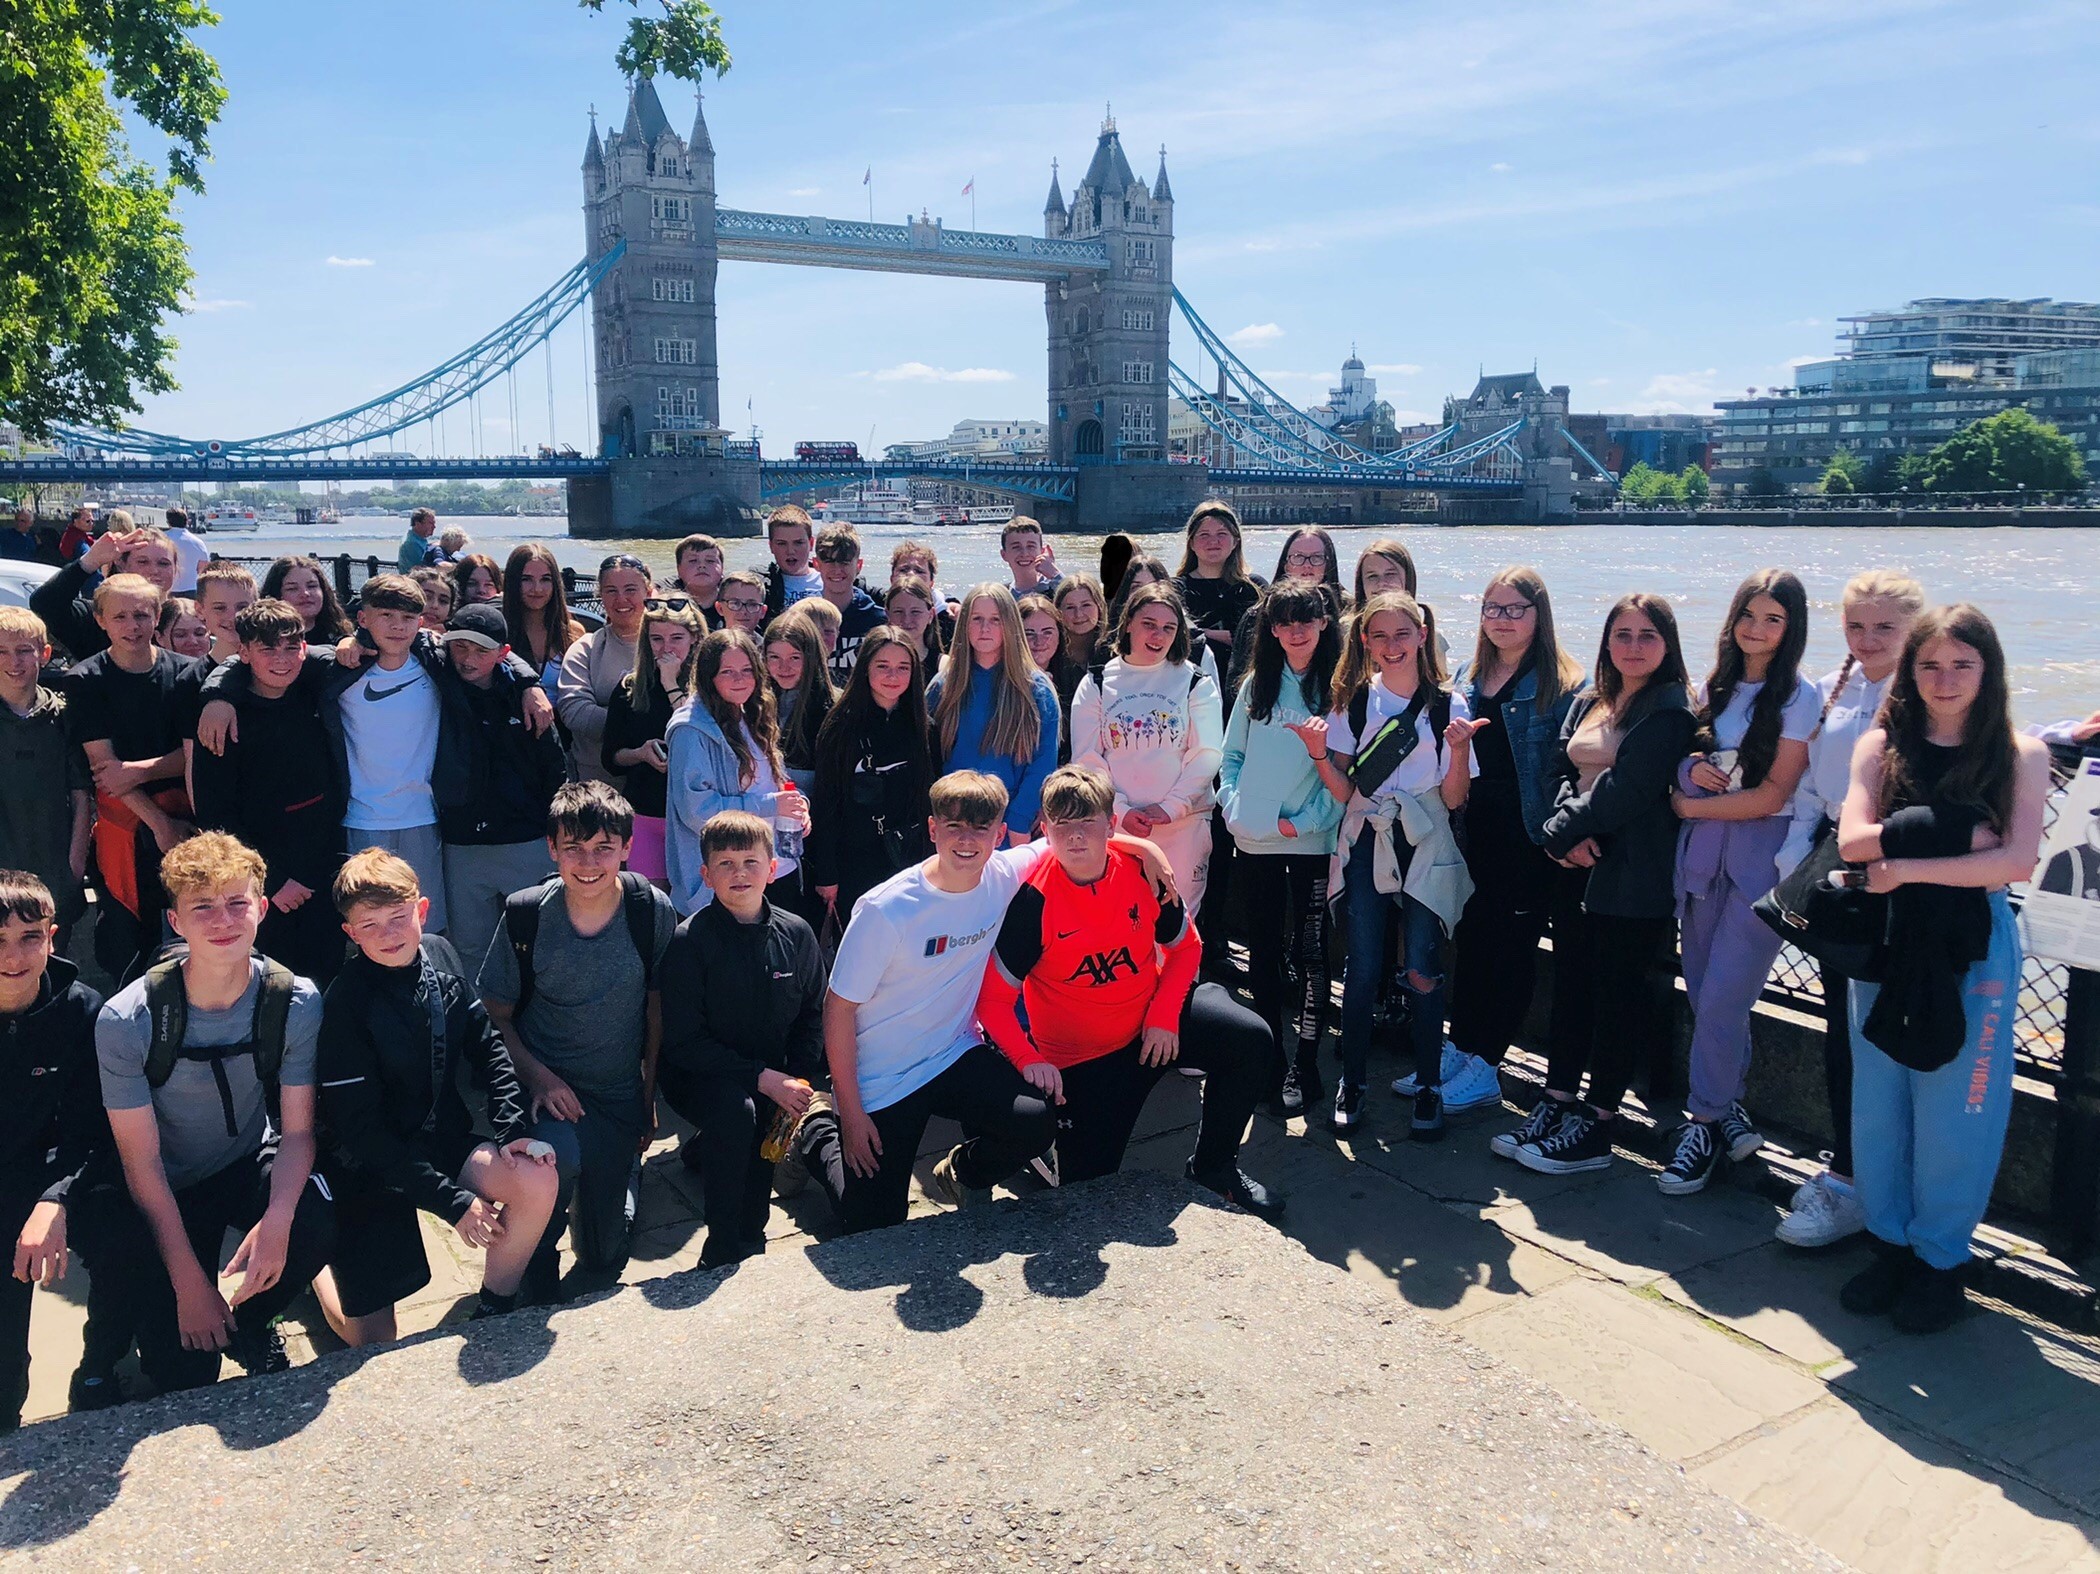 Flint High School students arrive in London ready to explore the City’s iconic sights.